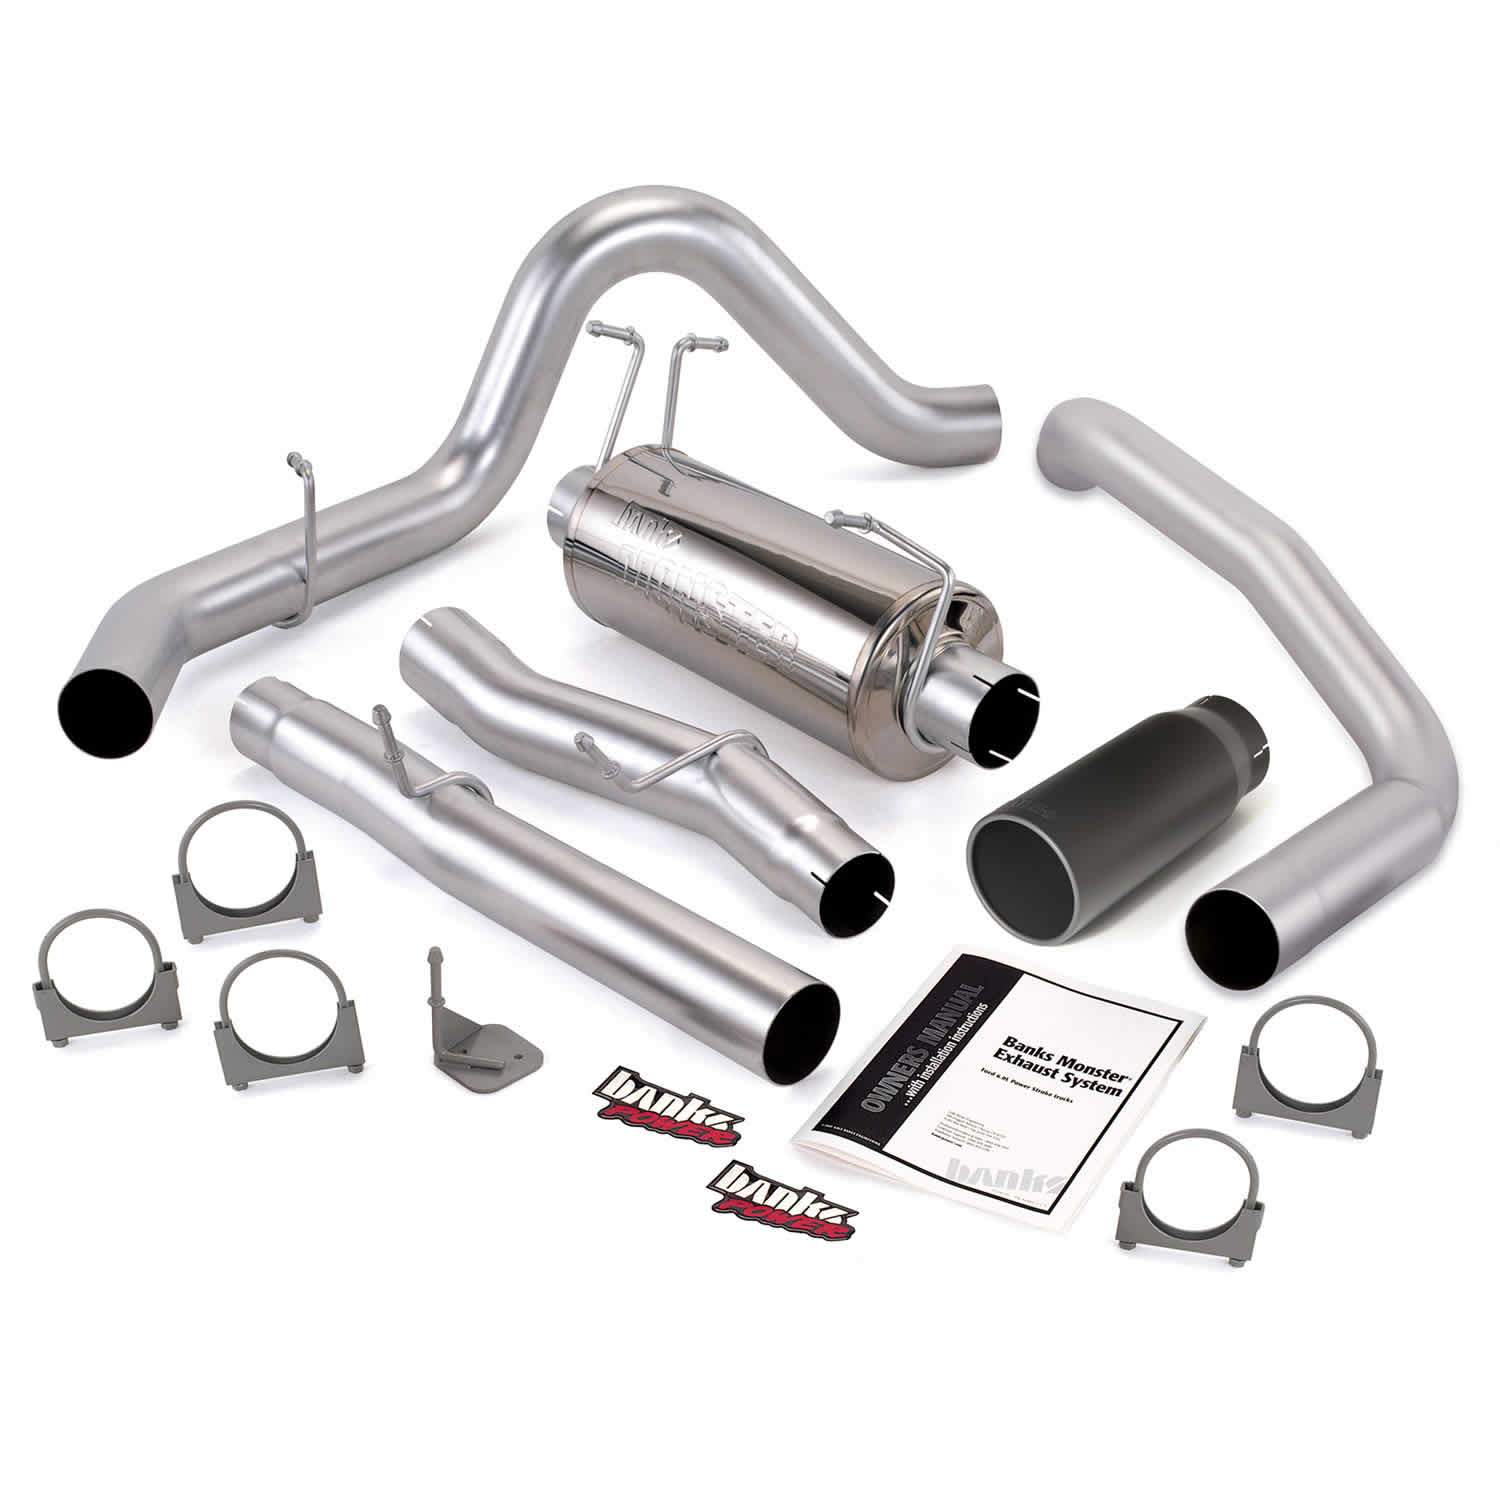 2003-2007 Powerstroke Exhaust System Kit - CCSB (48785)-Exhaust System Kit-Banks Power-48785-B-Dirty Diesel Customs